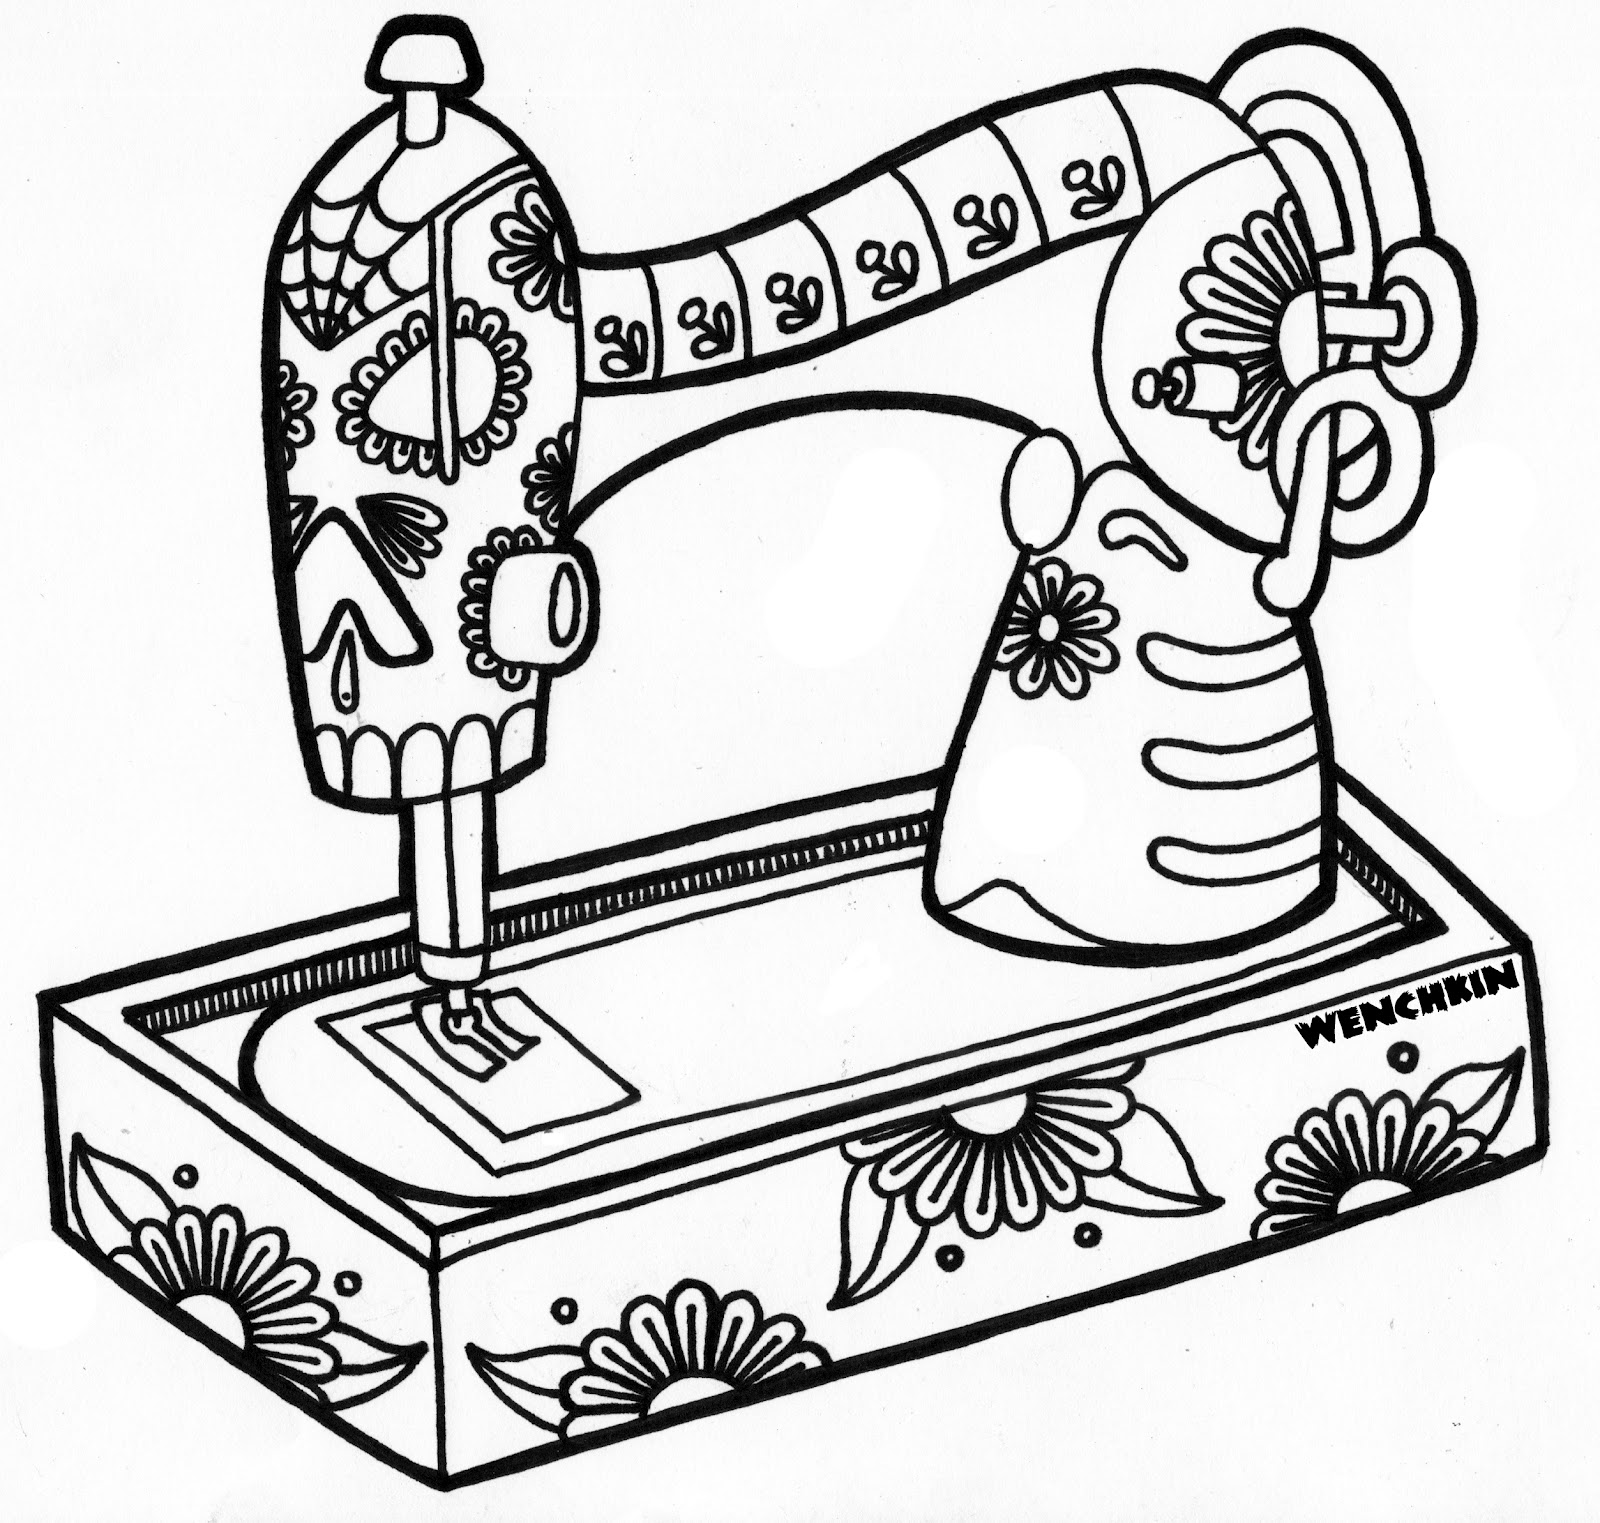 Download Yucca Flats, N.M.: Wenchkin's coloring pages - Skele Sewing Machine